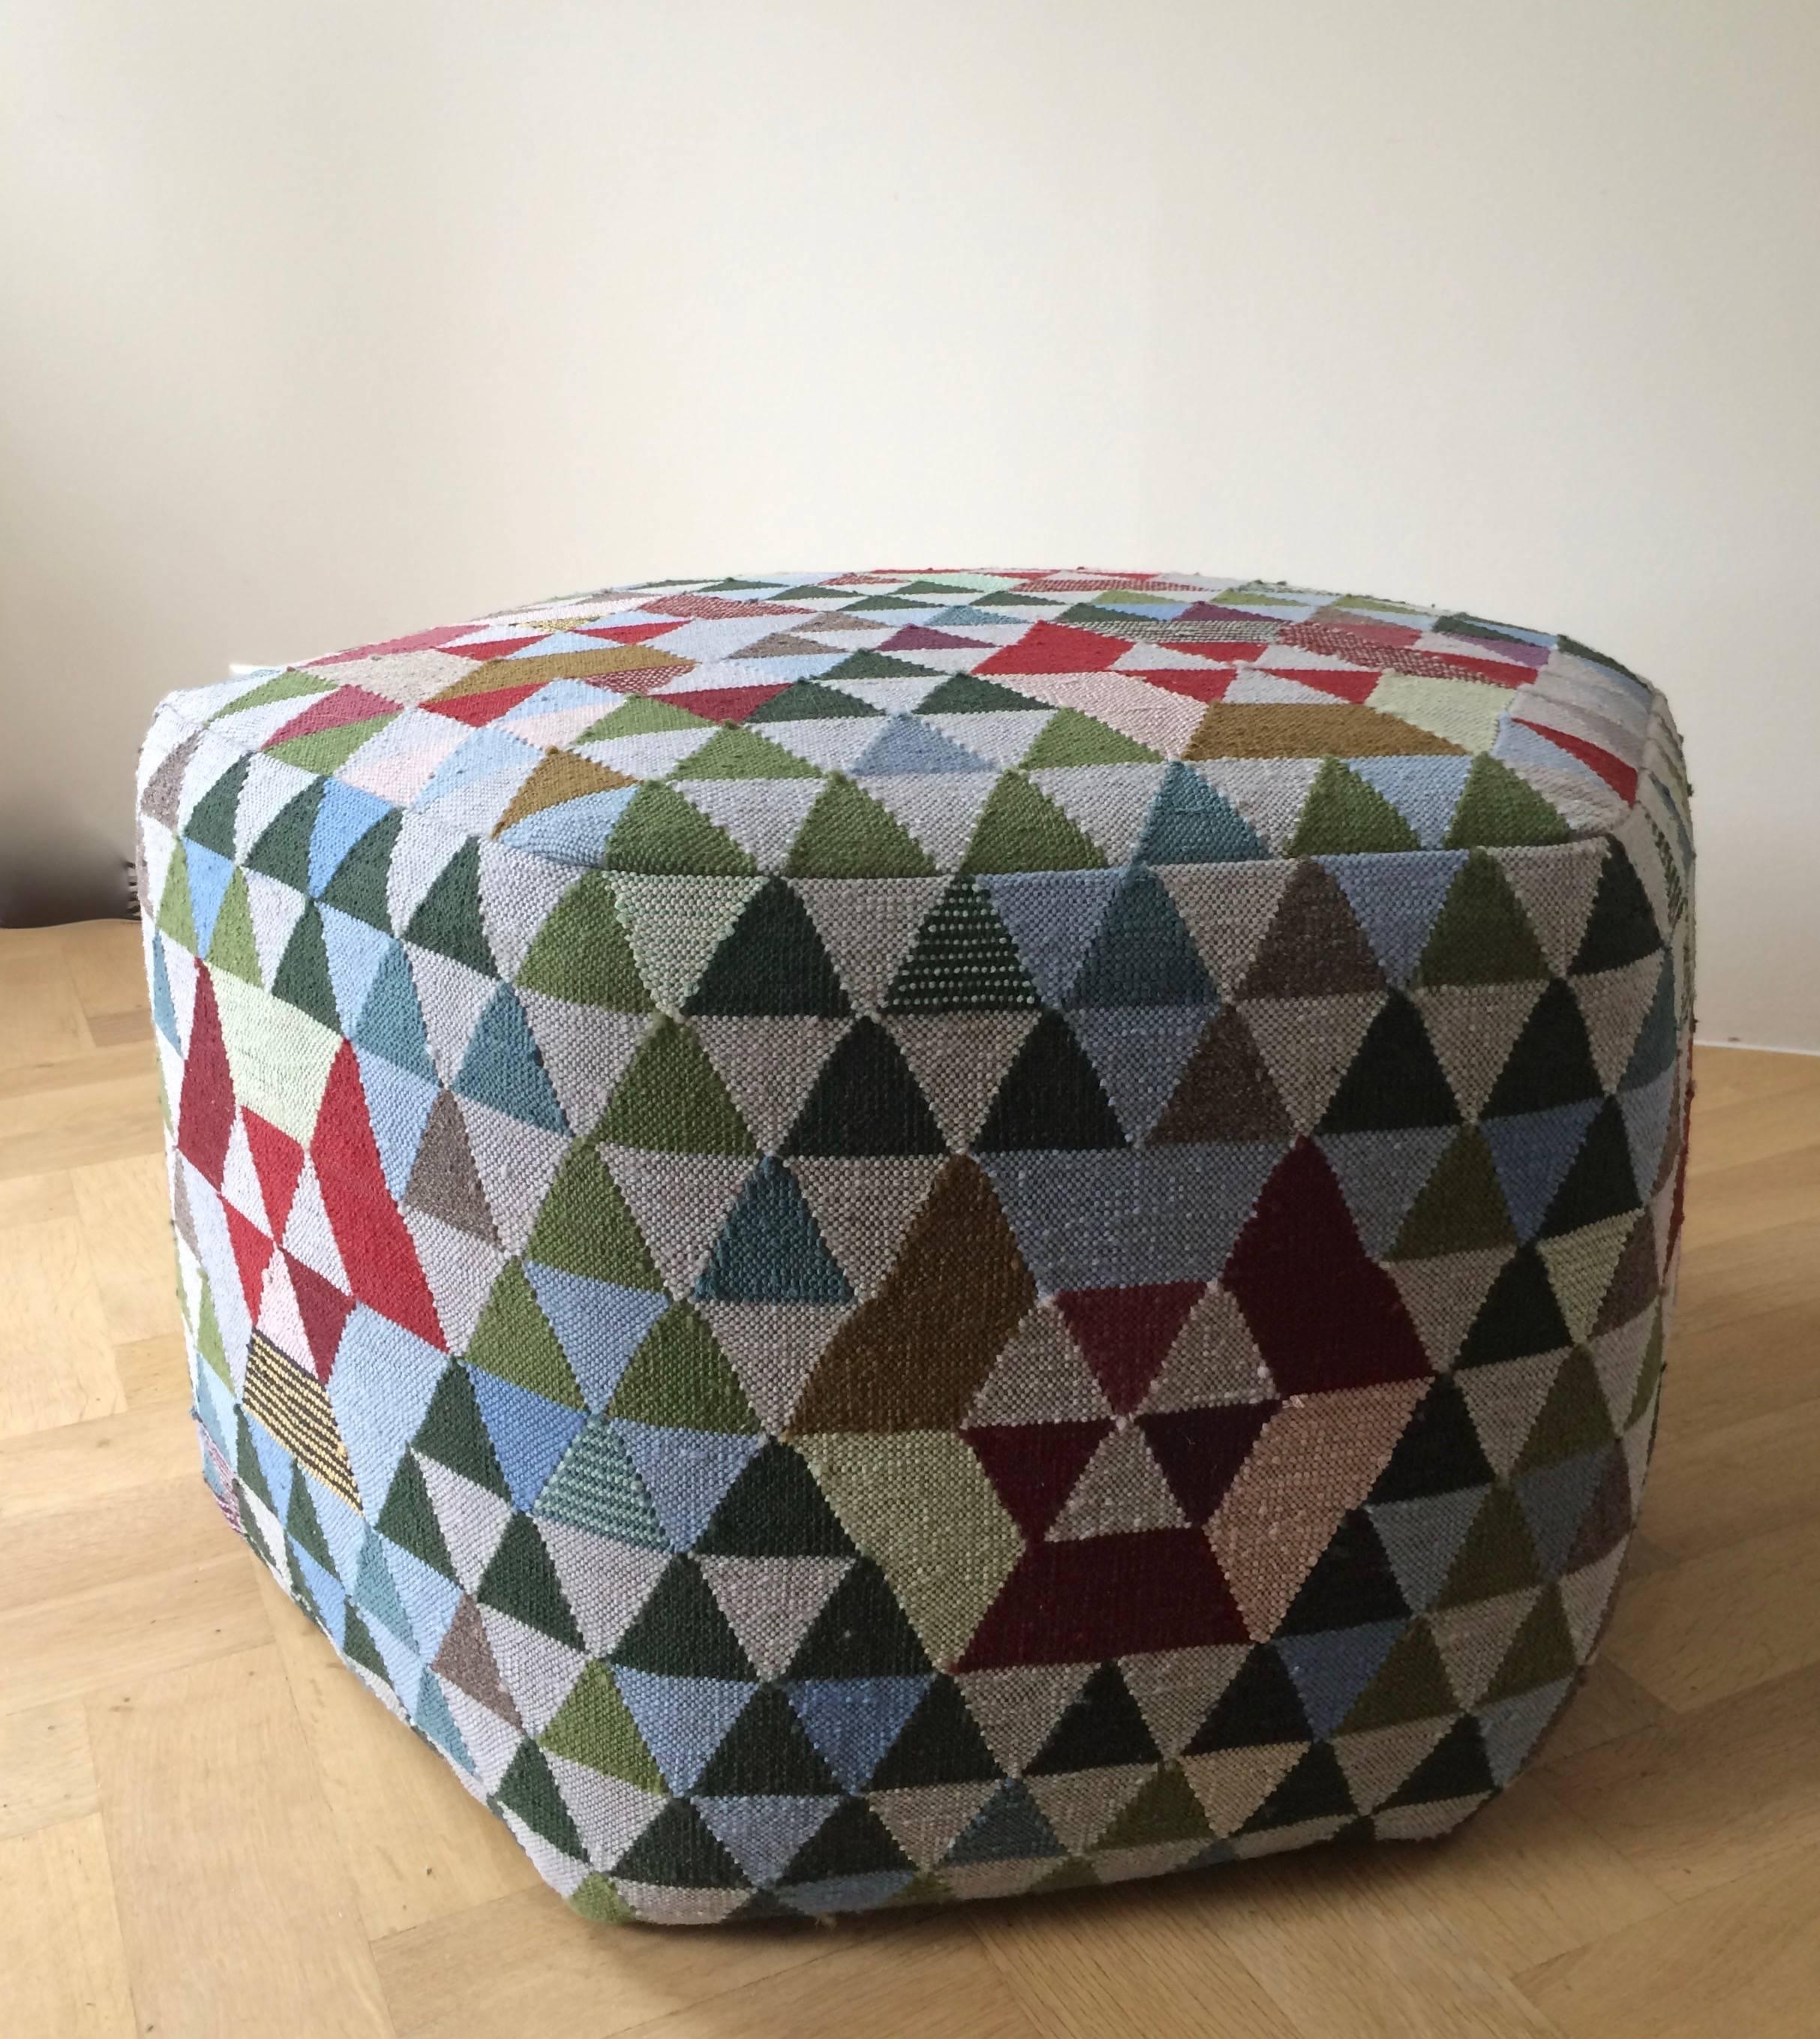 'Triangles' Pouf by Dutch Designer Bertjan Pot, designed for the legendary rug company Golran. 
The pouf is executed from a modern Kelim technique in a bright color palette of precious materials as fine wools, silk, and cactus fibers and is a